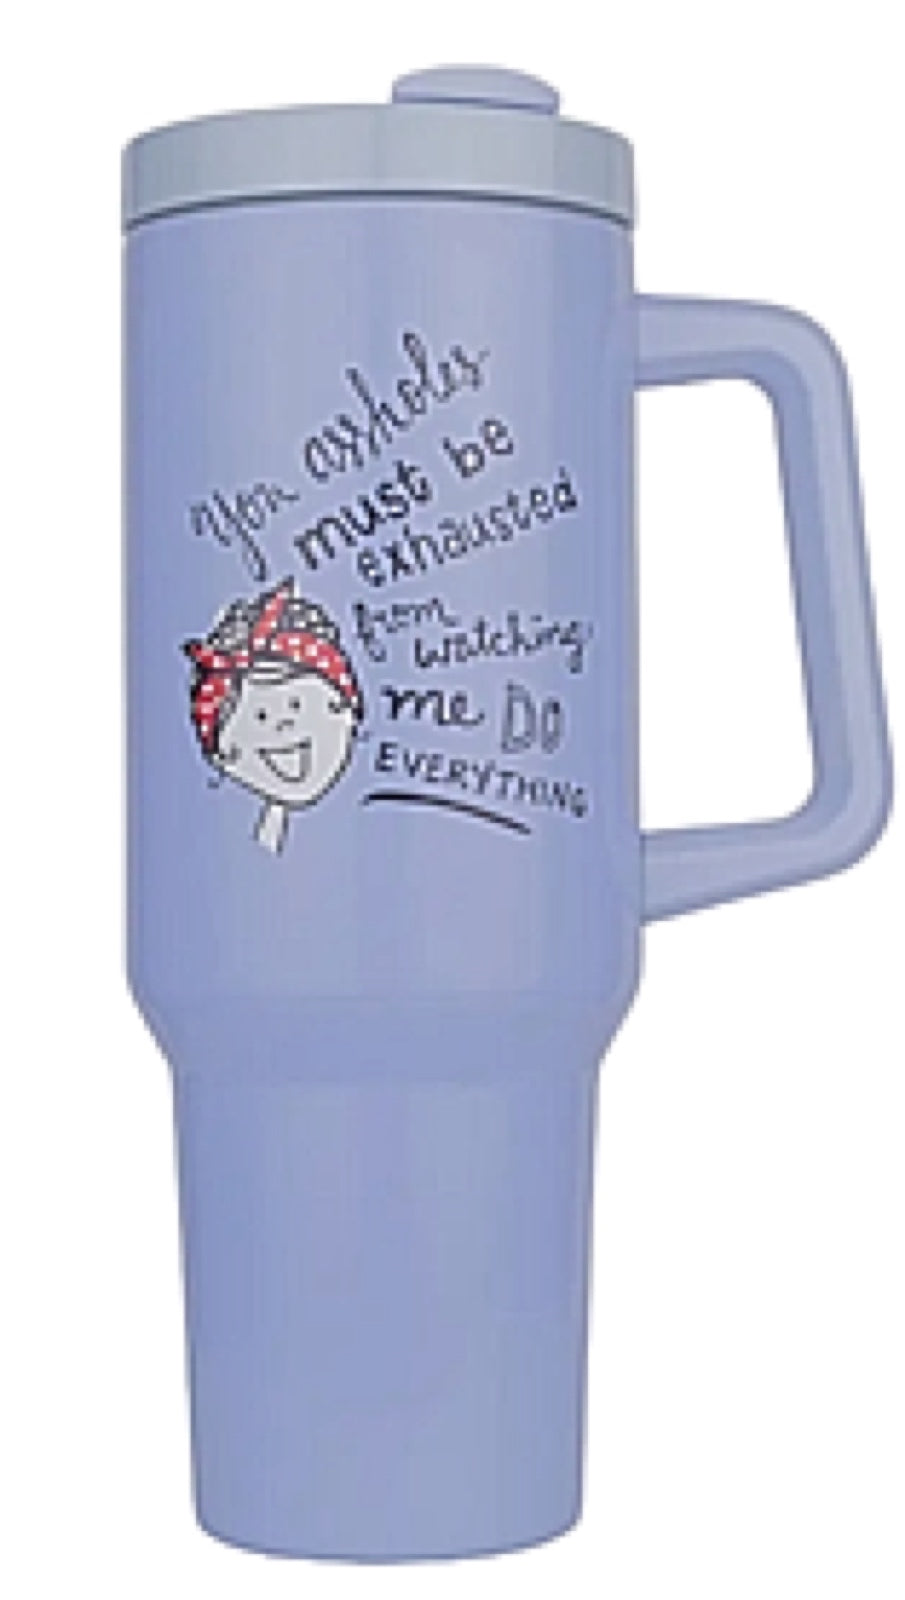 40 Oz Mug: You A**holes But Be Exhausted Watching Me Do Everything